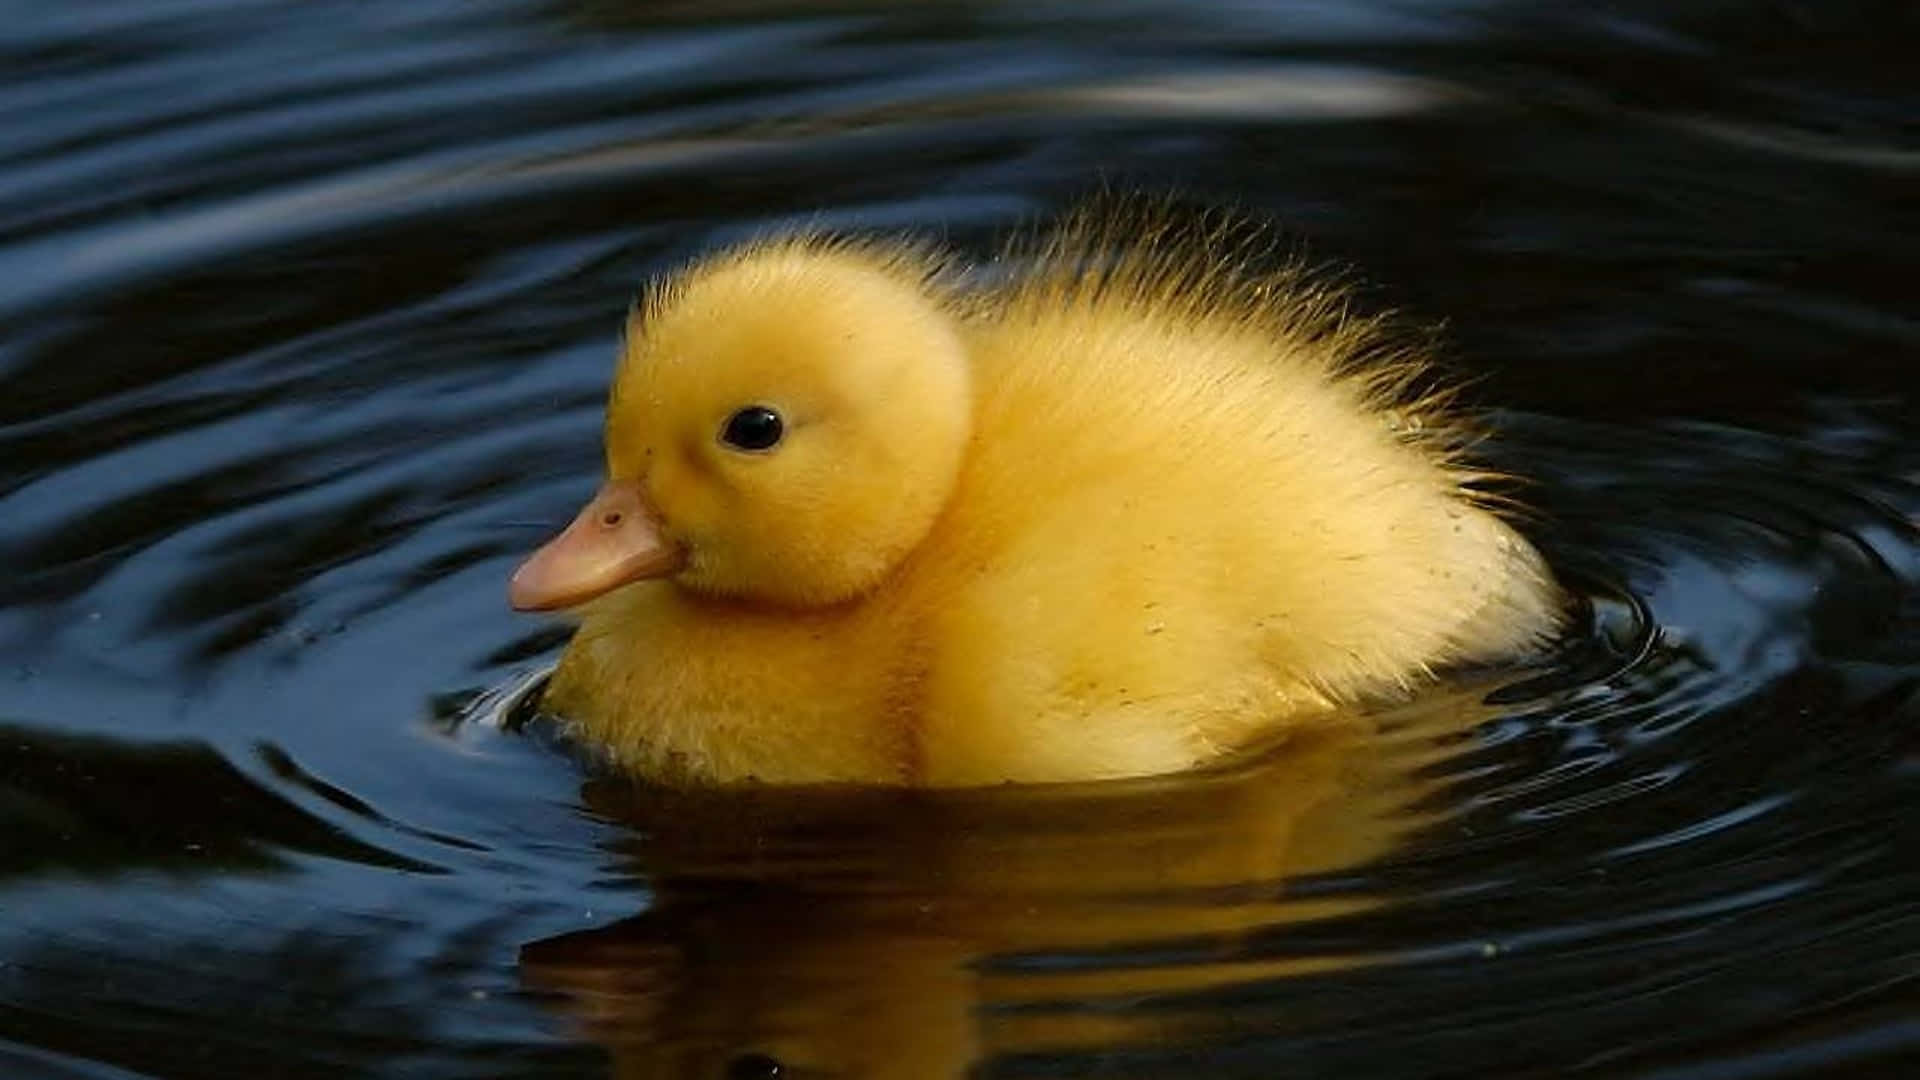 Look At This Sweet, Fluffy Little Duckling!